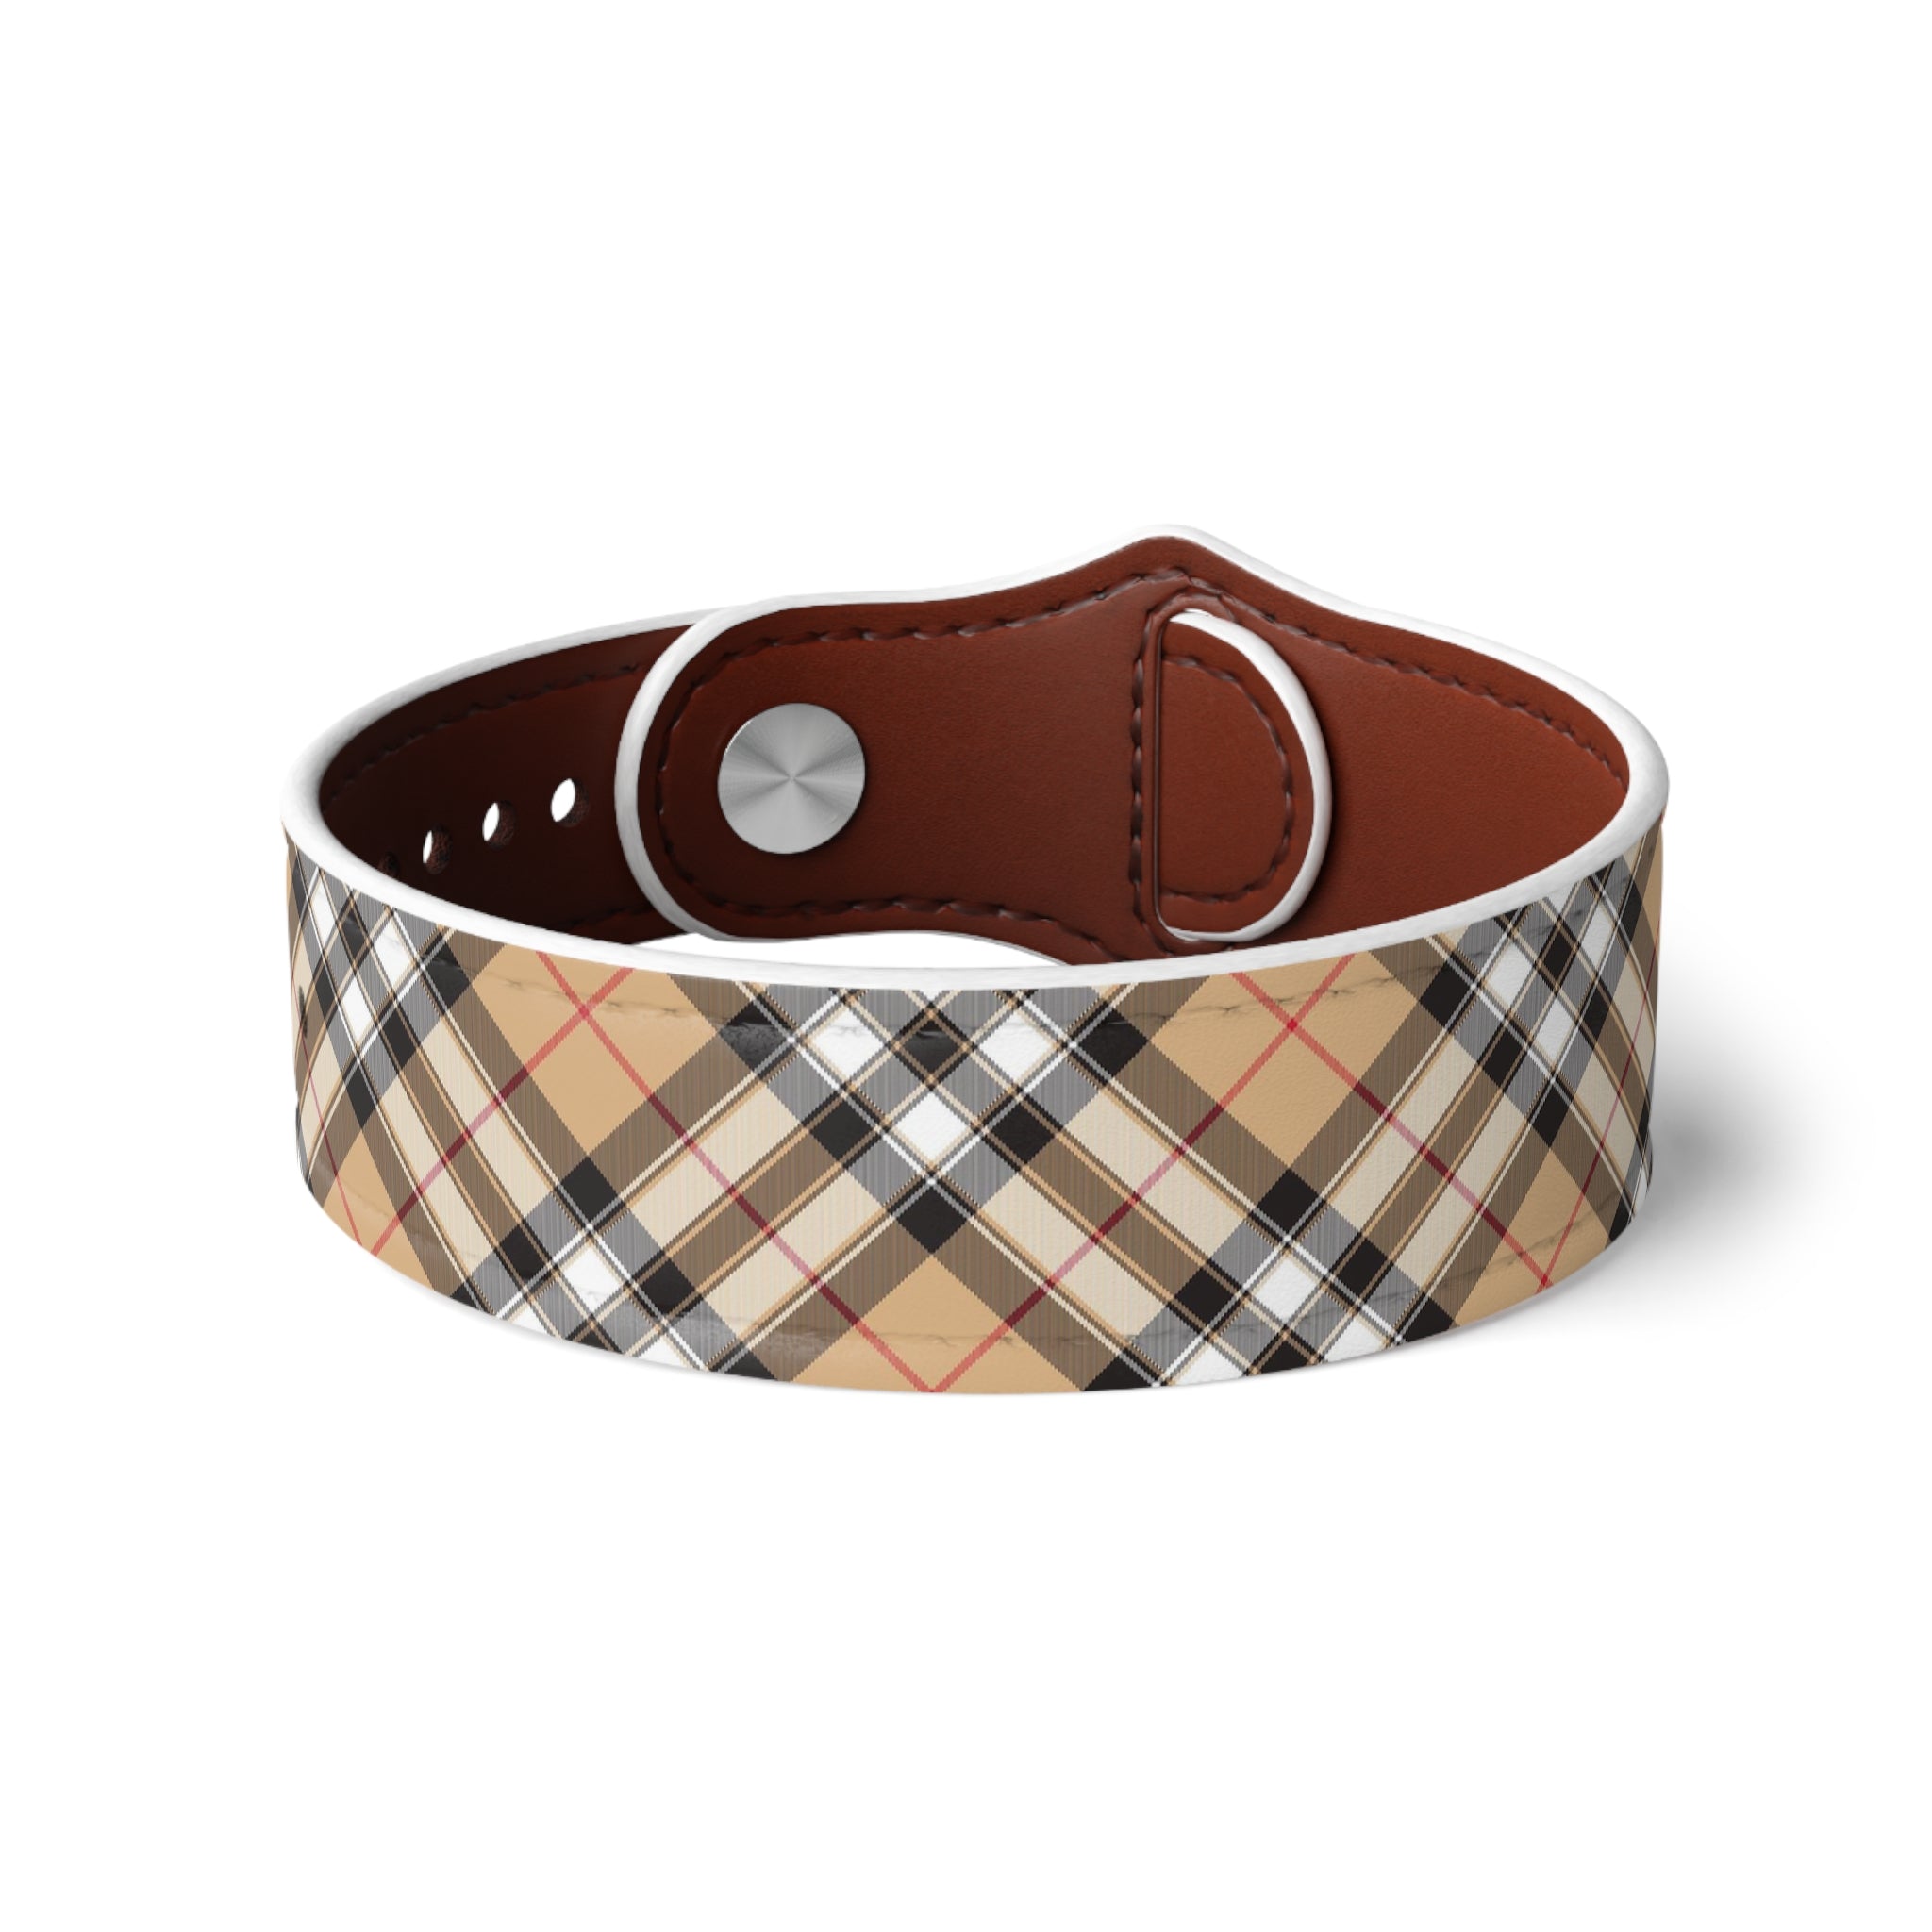 Casual Wear Accessories in Beige Faux Leather Wristband, Unisex Leather Bracelet, Faux Leather Cuff, Unisex Accessories